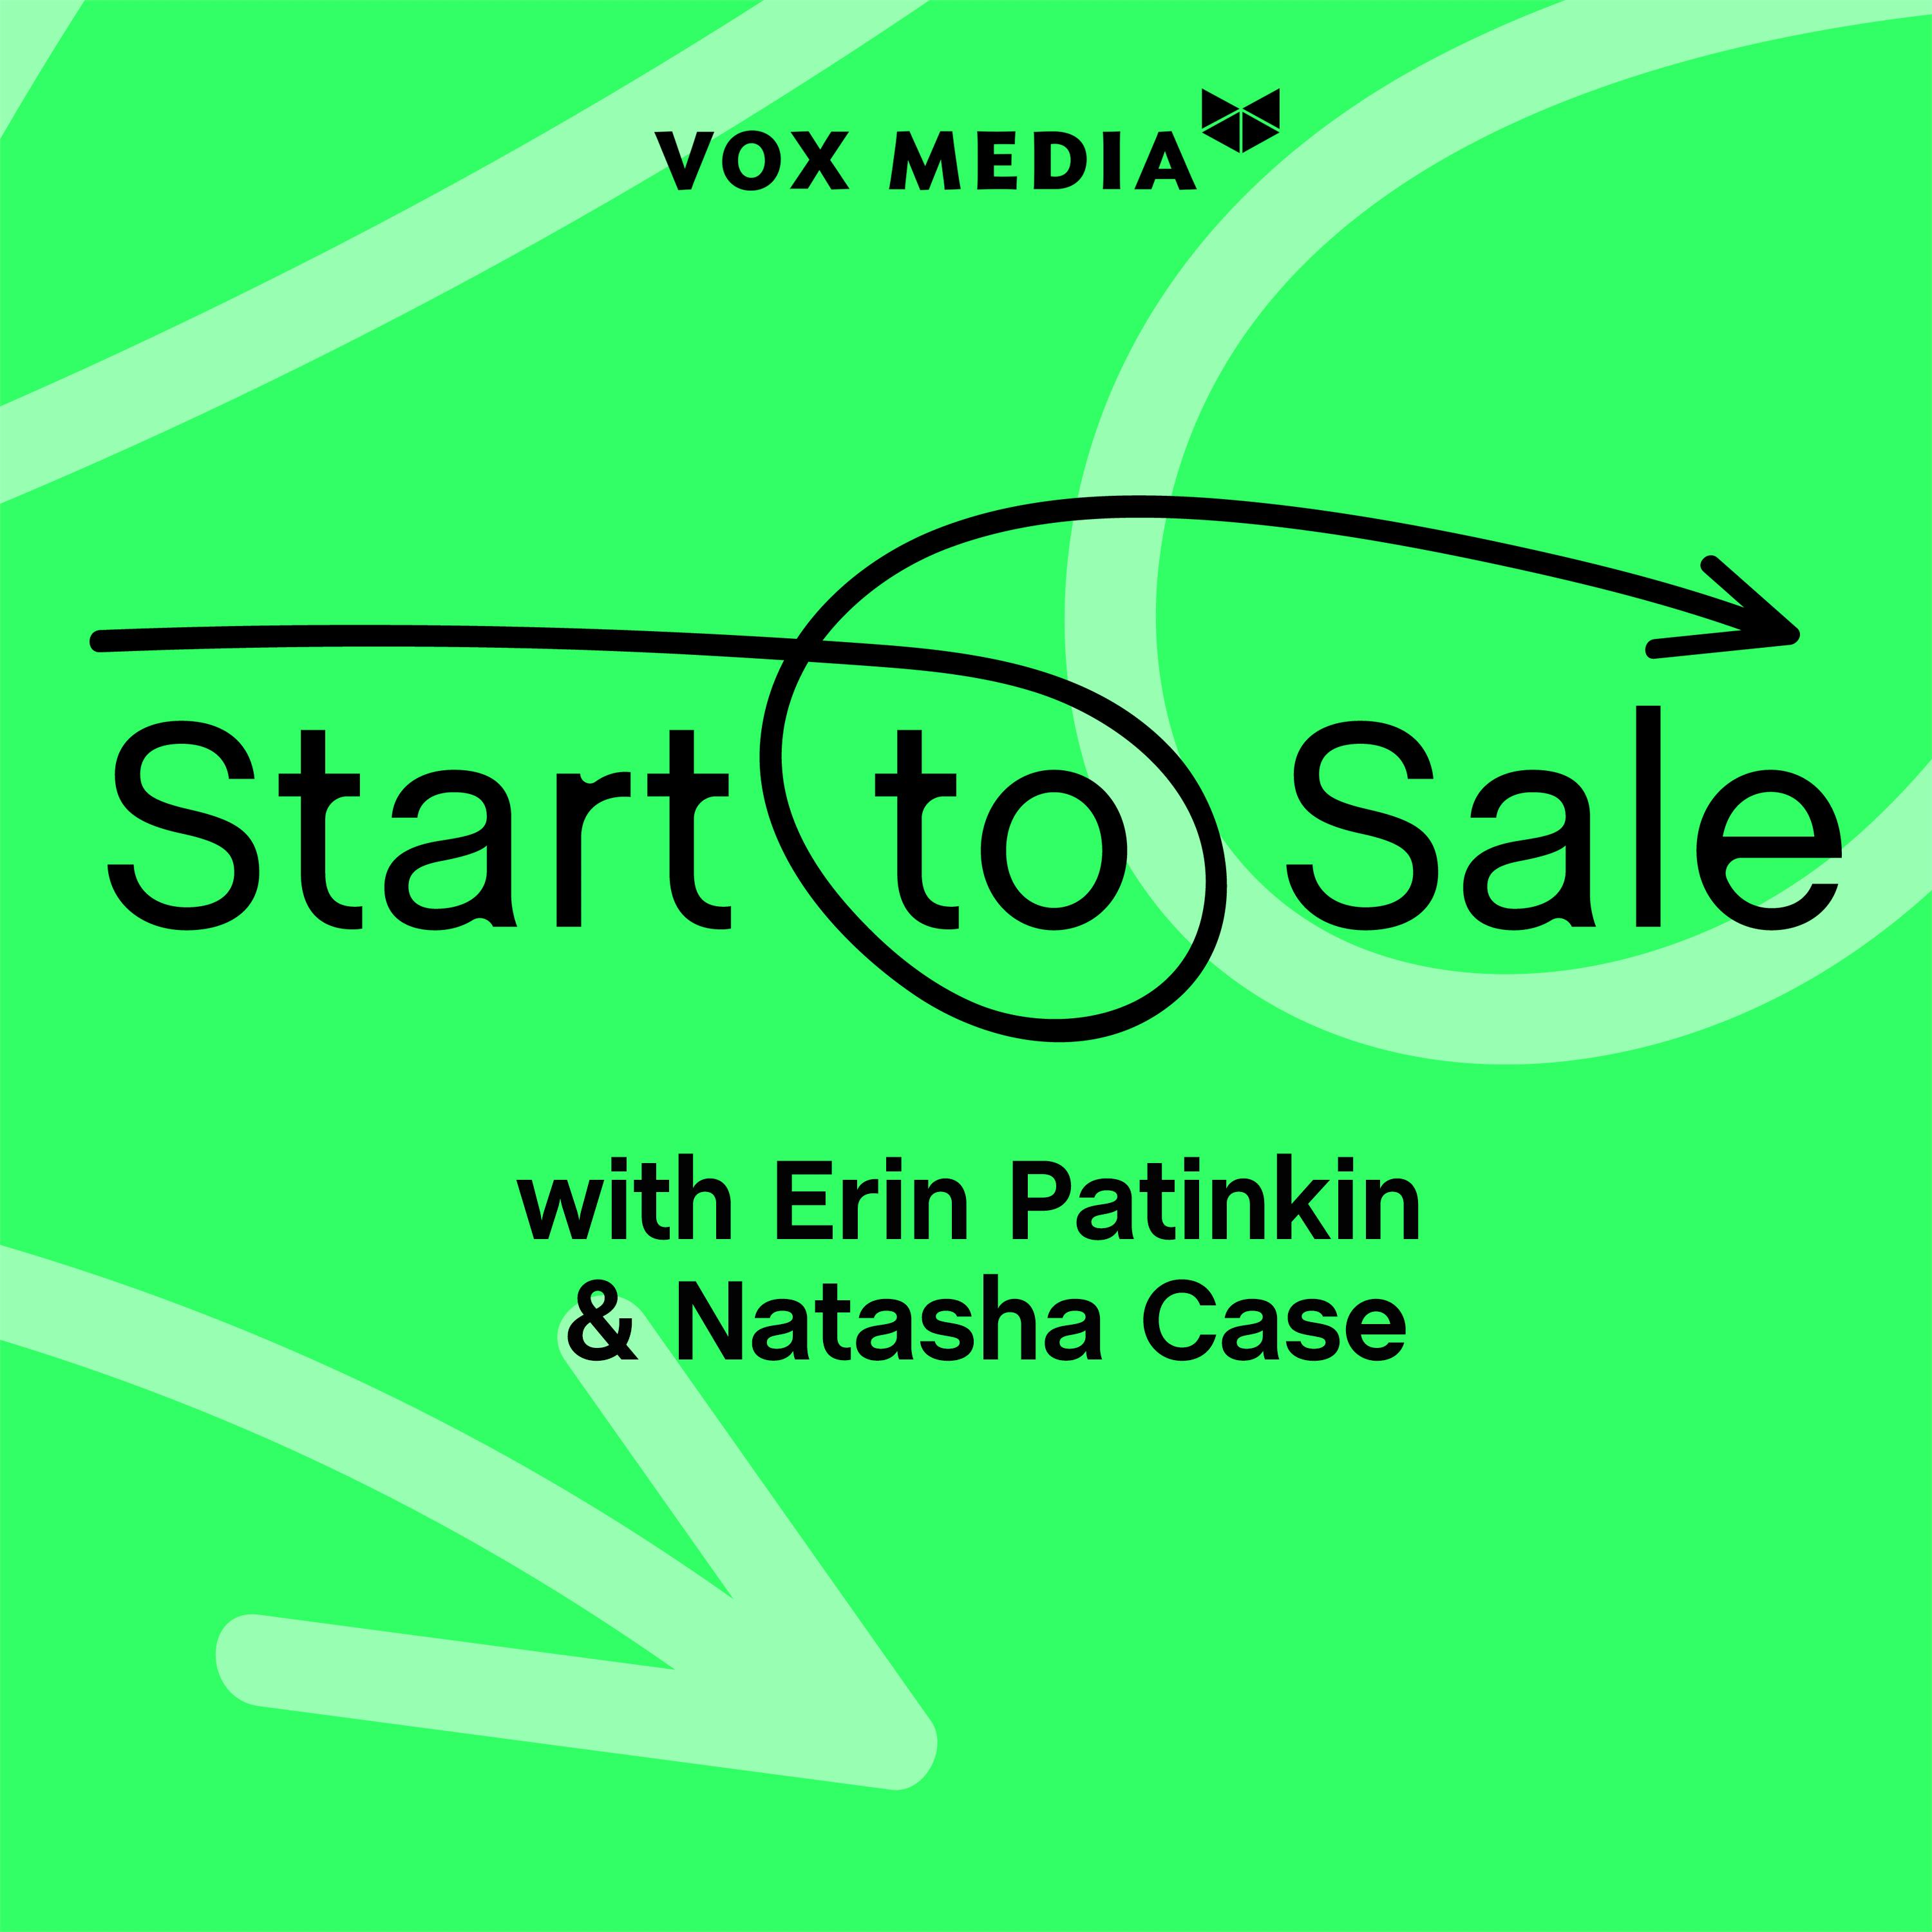 Introducing Start to Sale